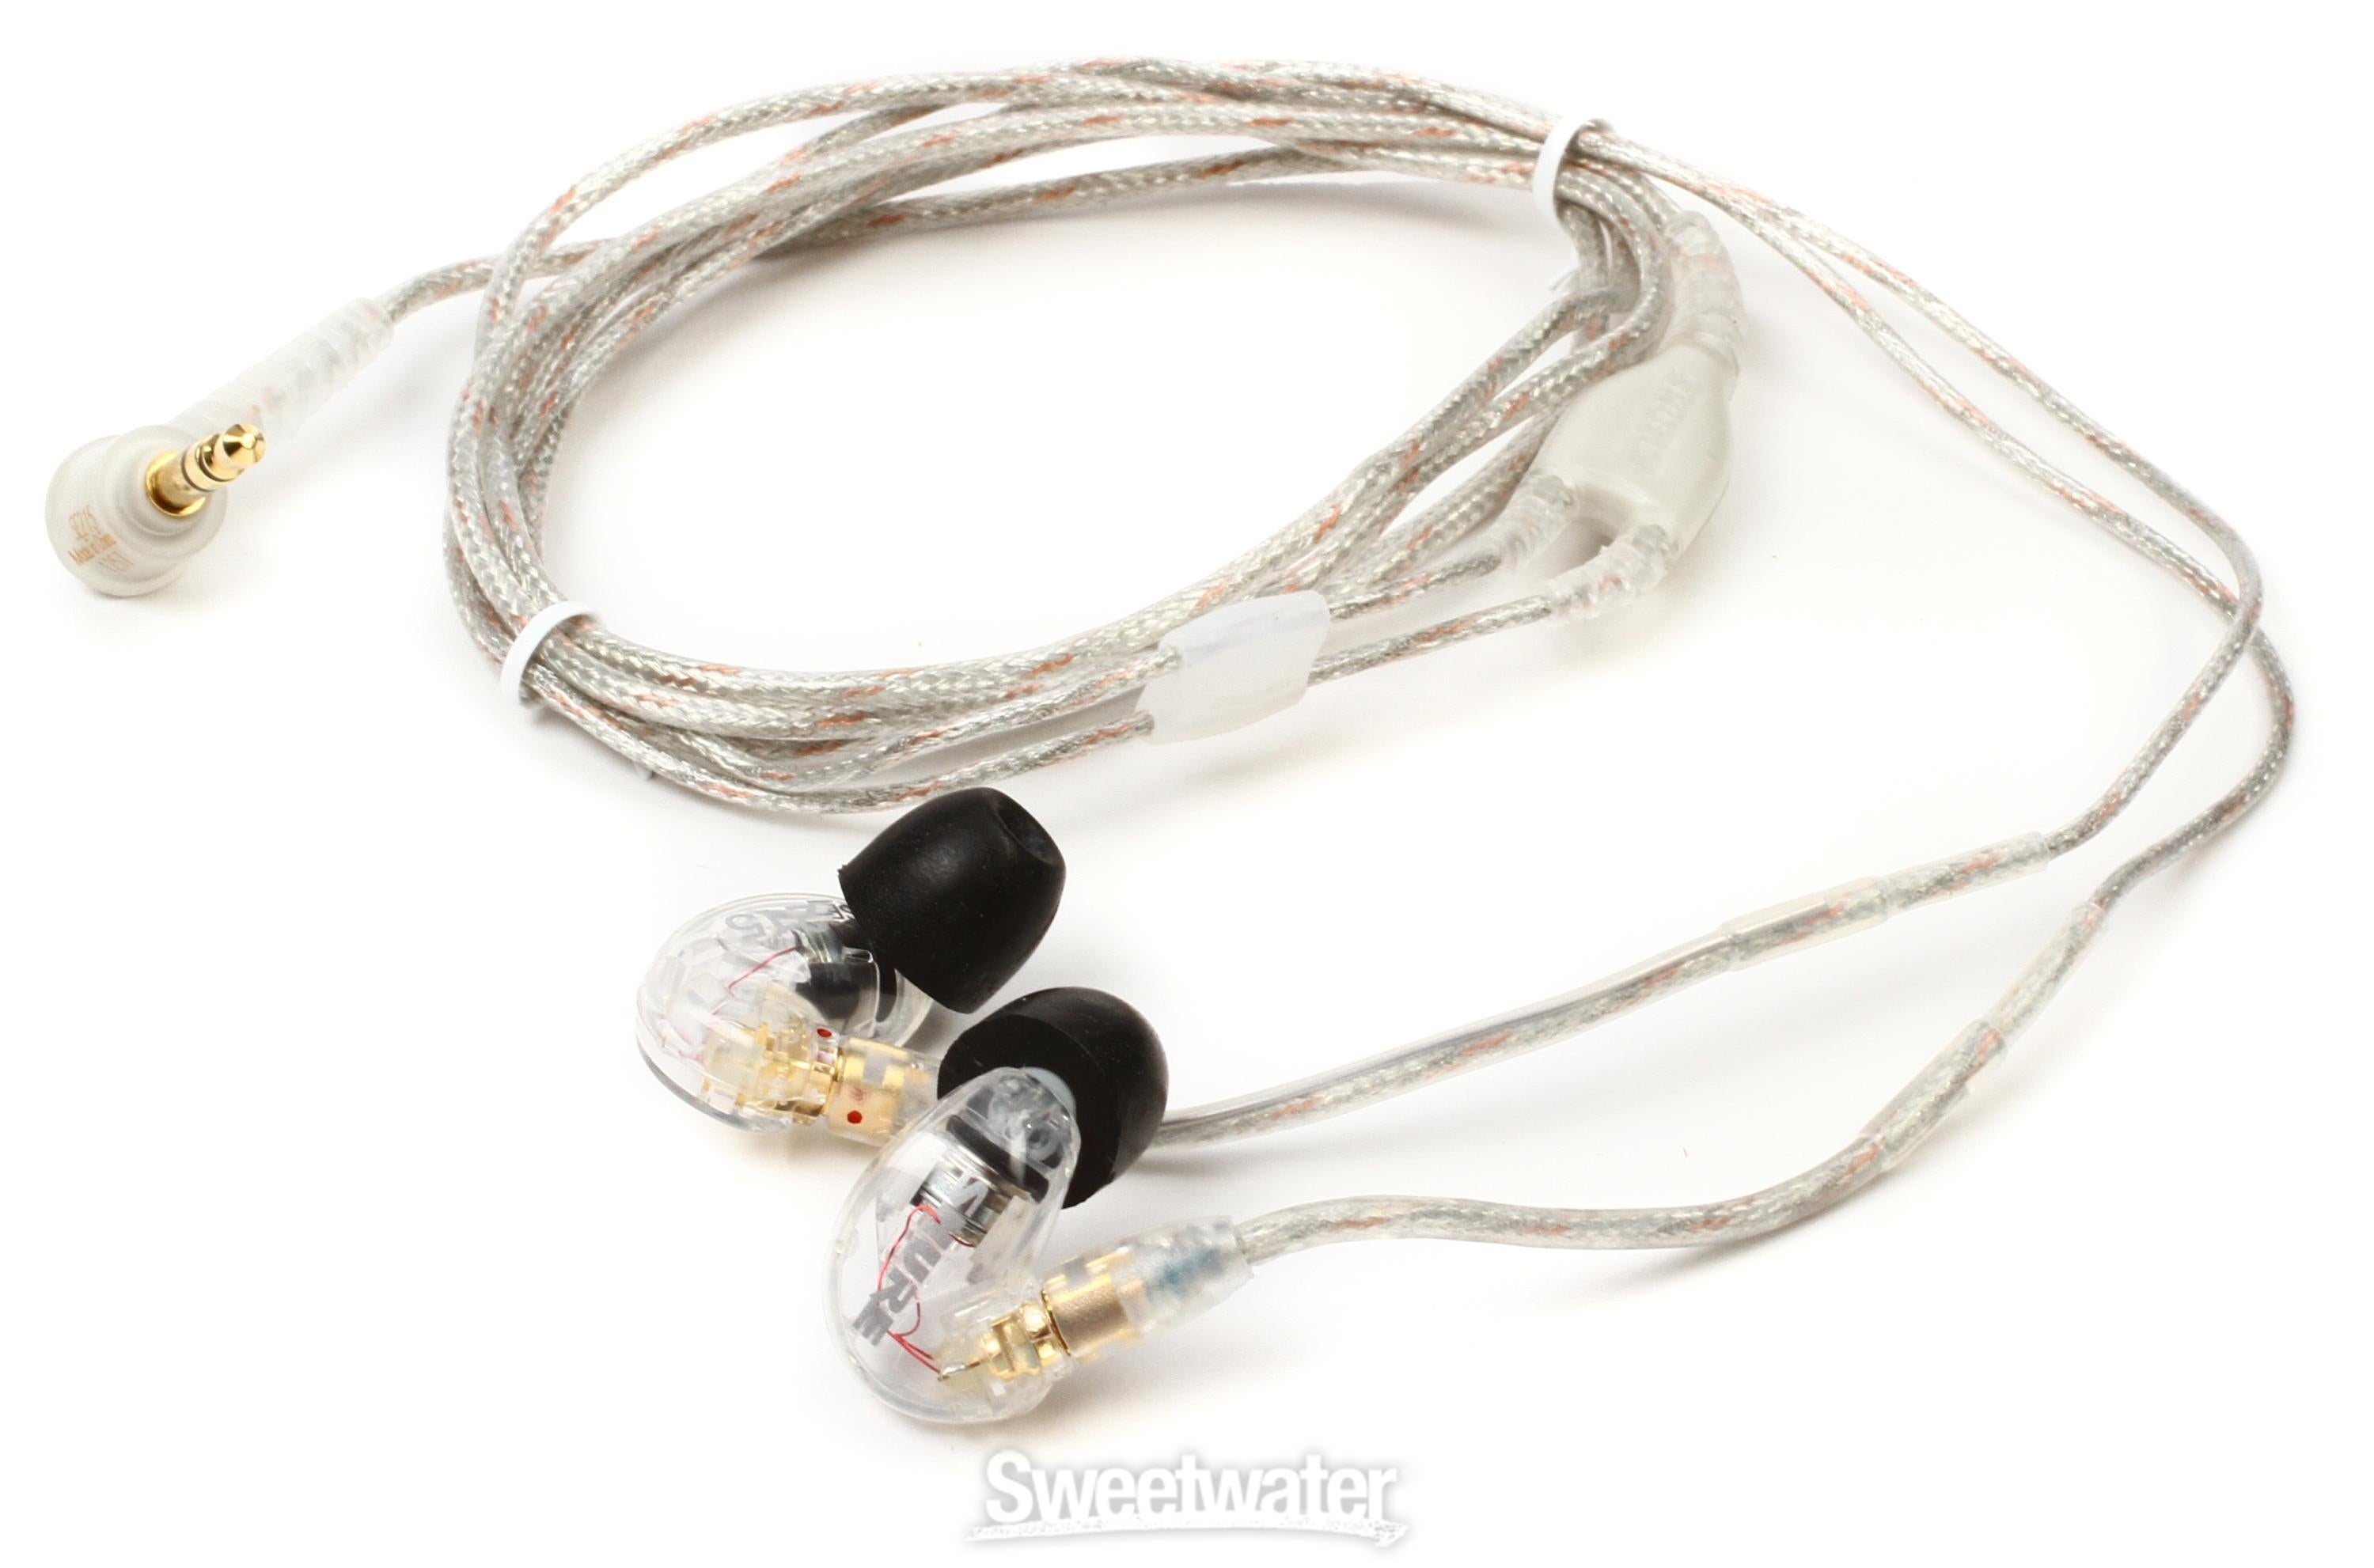 Shure SE215-CL Sound-isolating Earphones - Clear | Sweetwater